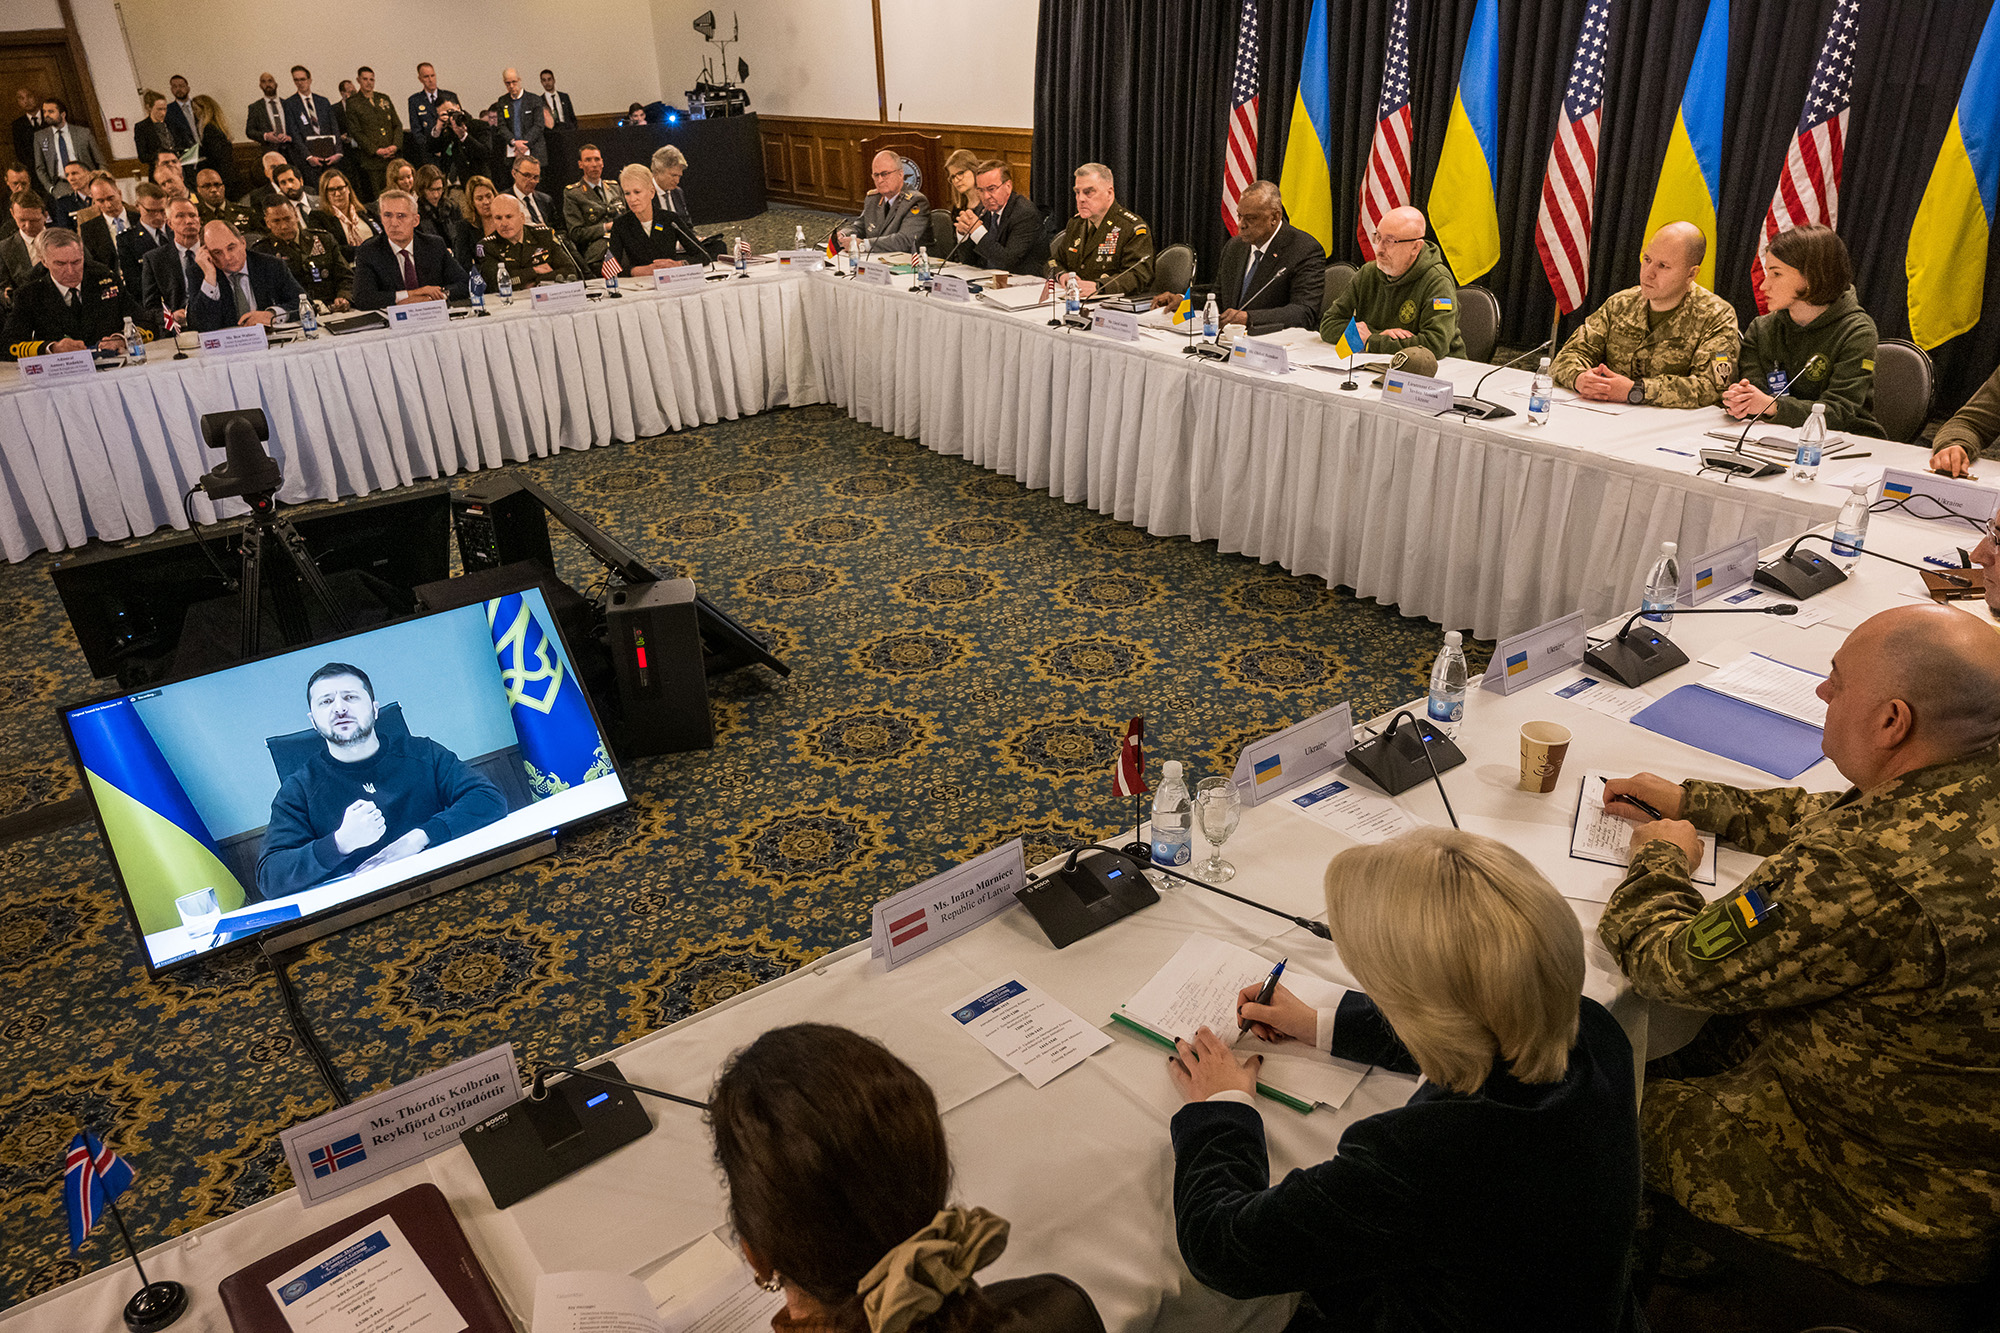 Ukrainian President Volodymyr Zelensky addresses a meeting of the Ukraine Defense Contact Group at Ramstein Air Base on January 20, in Ramstein-Miesenbach, Germany.